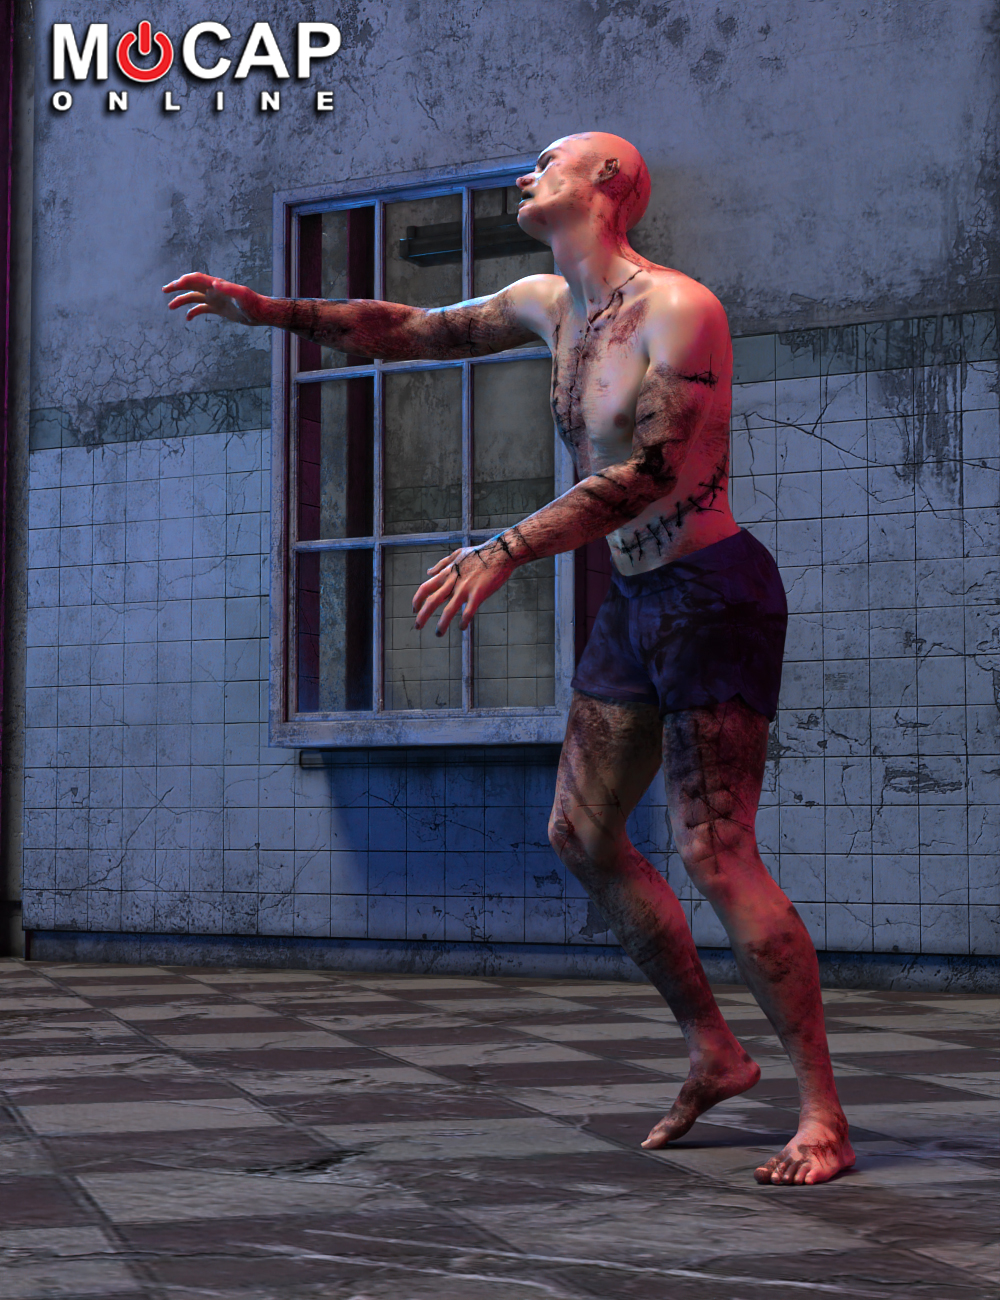 Zombie Animation Collection P2 for Michael 8 by: Mocap Online, 3D Models by Daz 3D